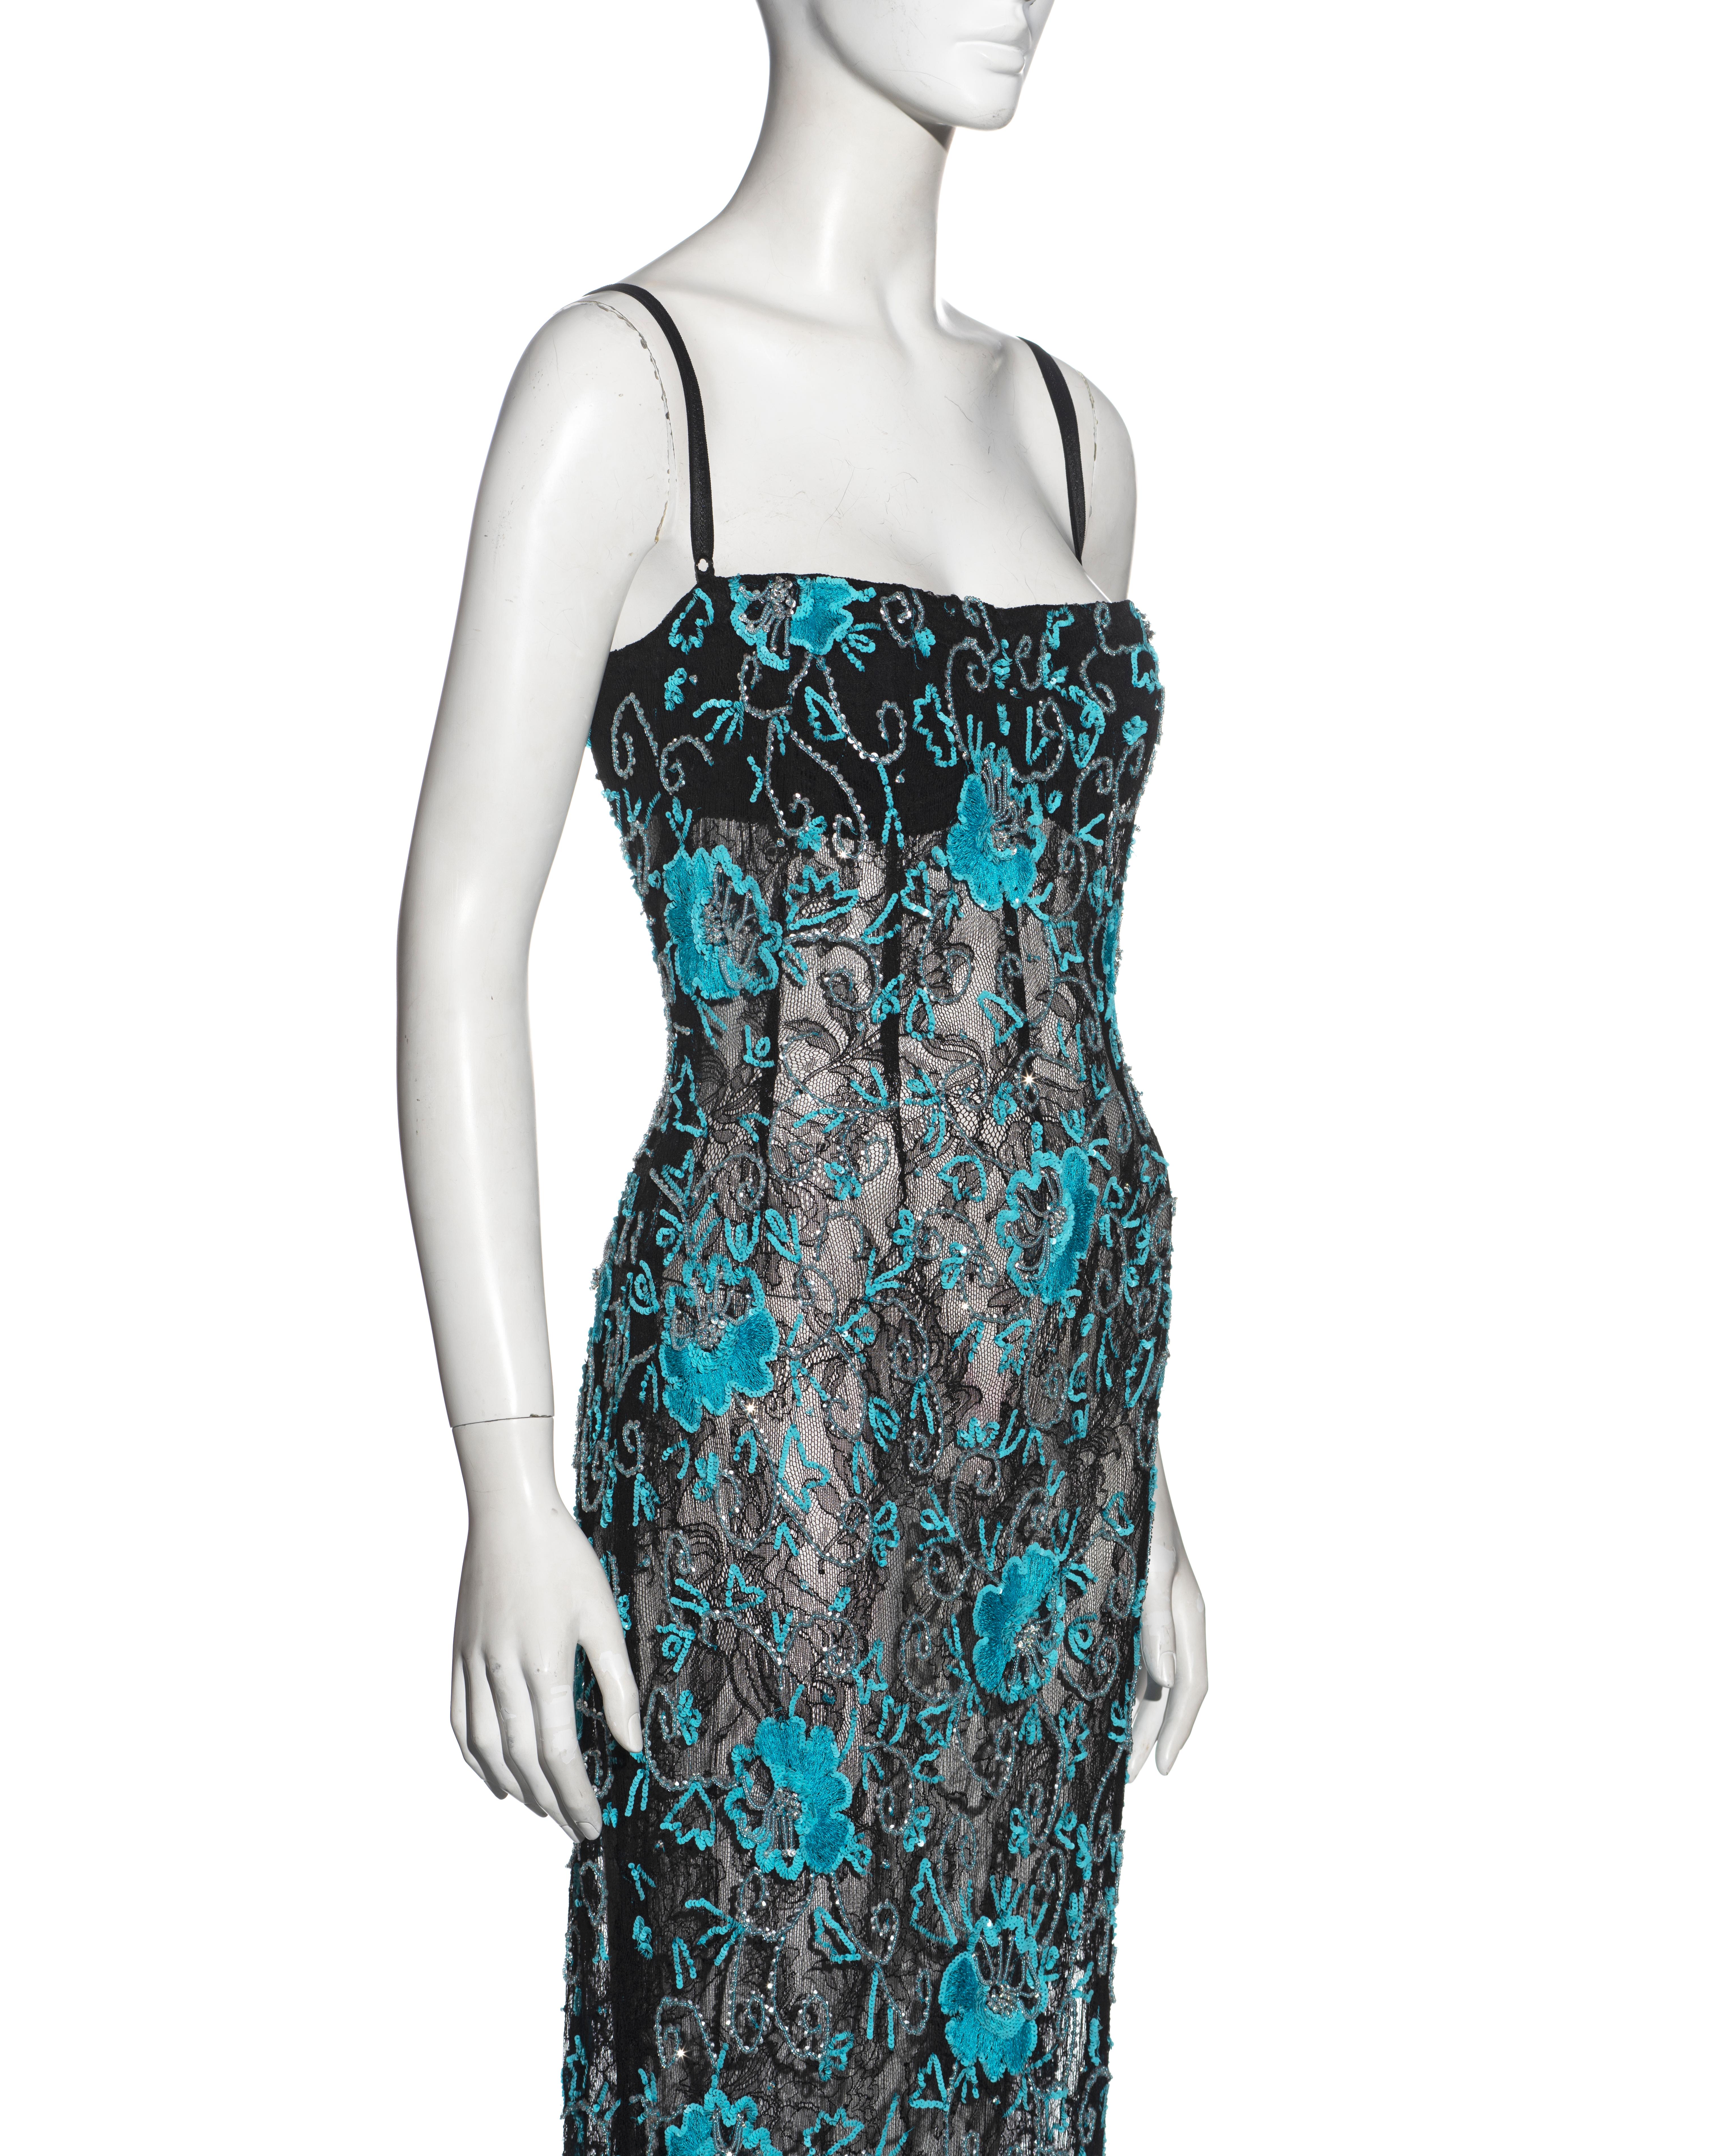 Women's Dolce & Gabbana black lace evening dress with turquoise embroidery, fw 1999